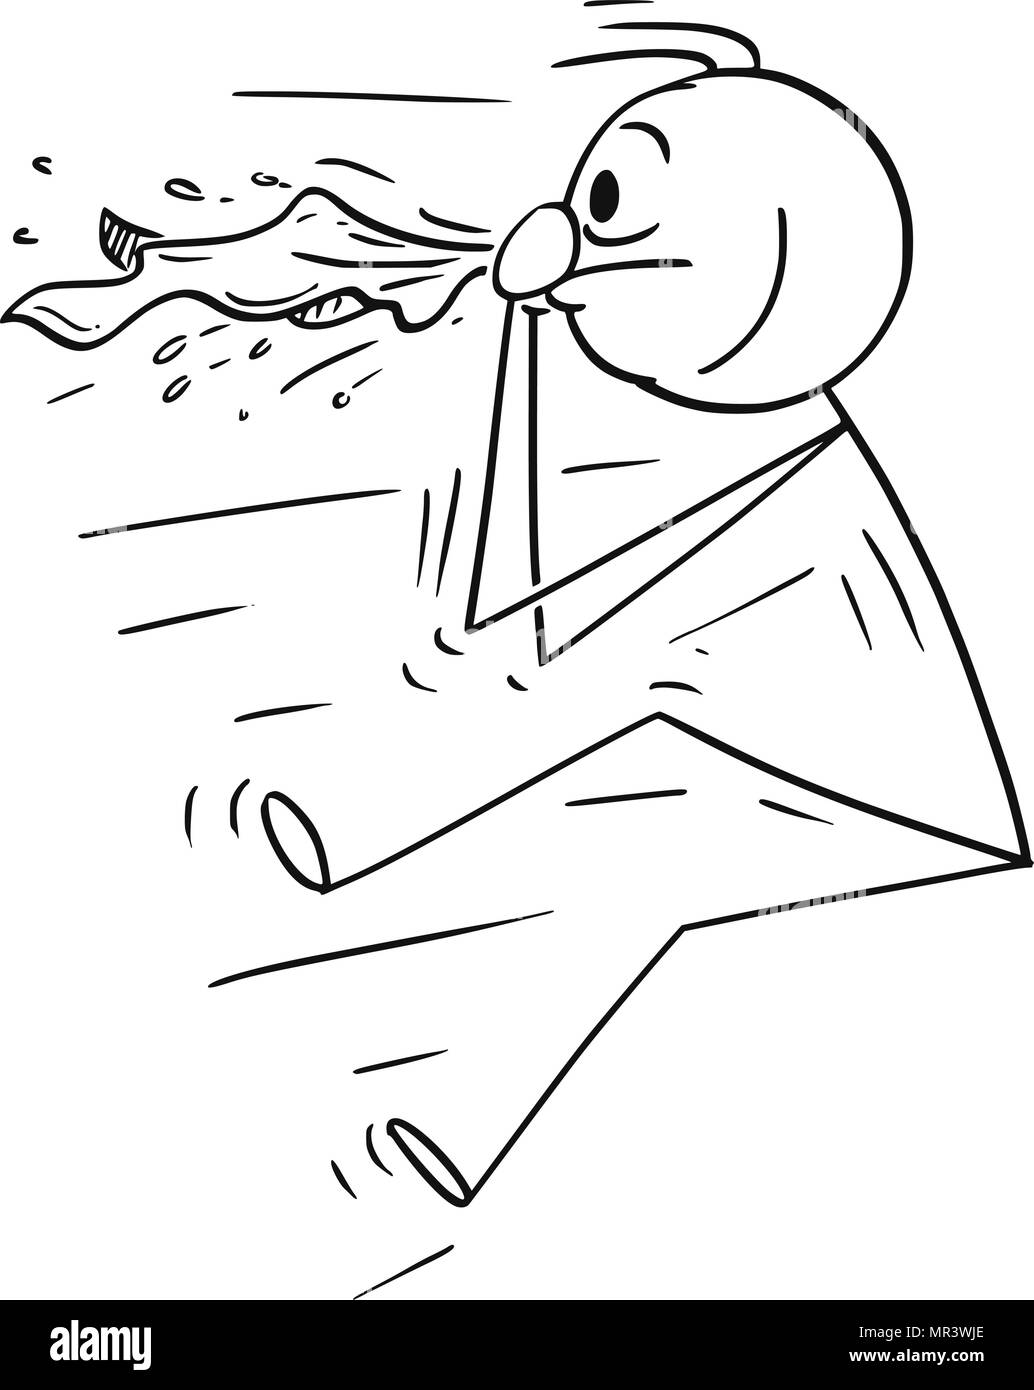 Cartoon of Man Blown by Sneeze or Nose Blow Stock Vector